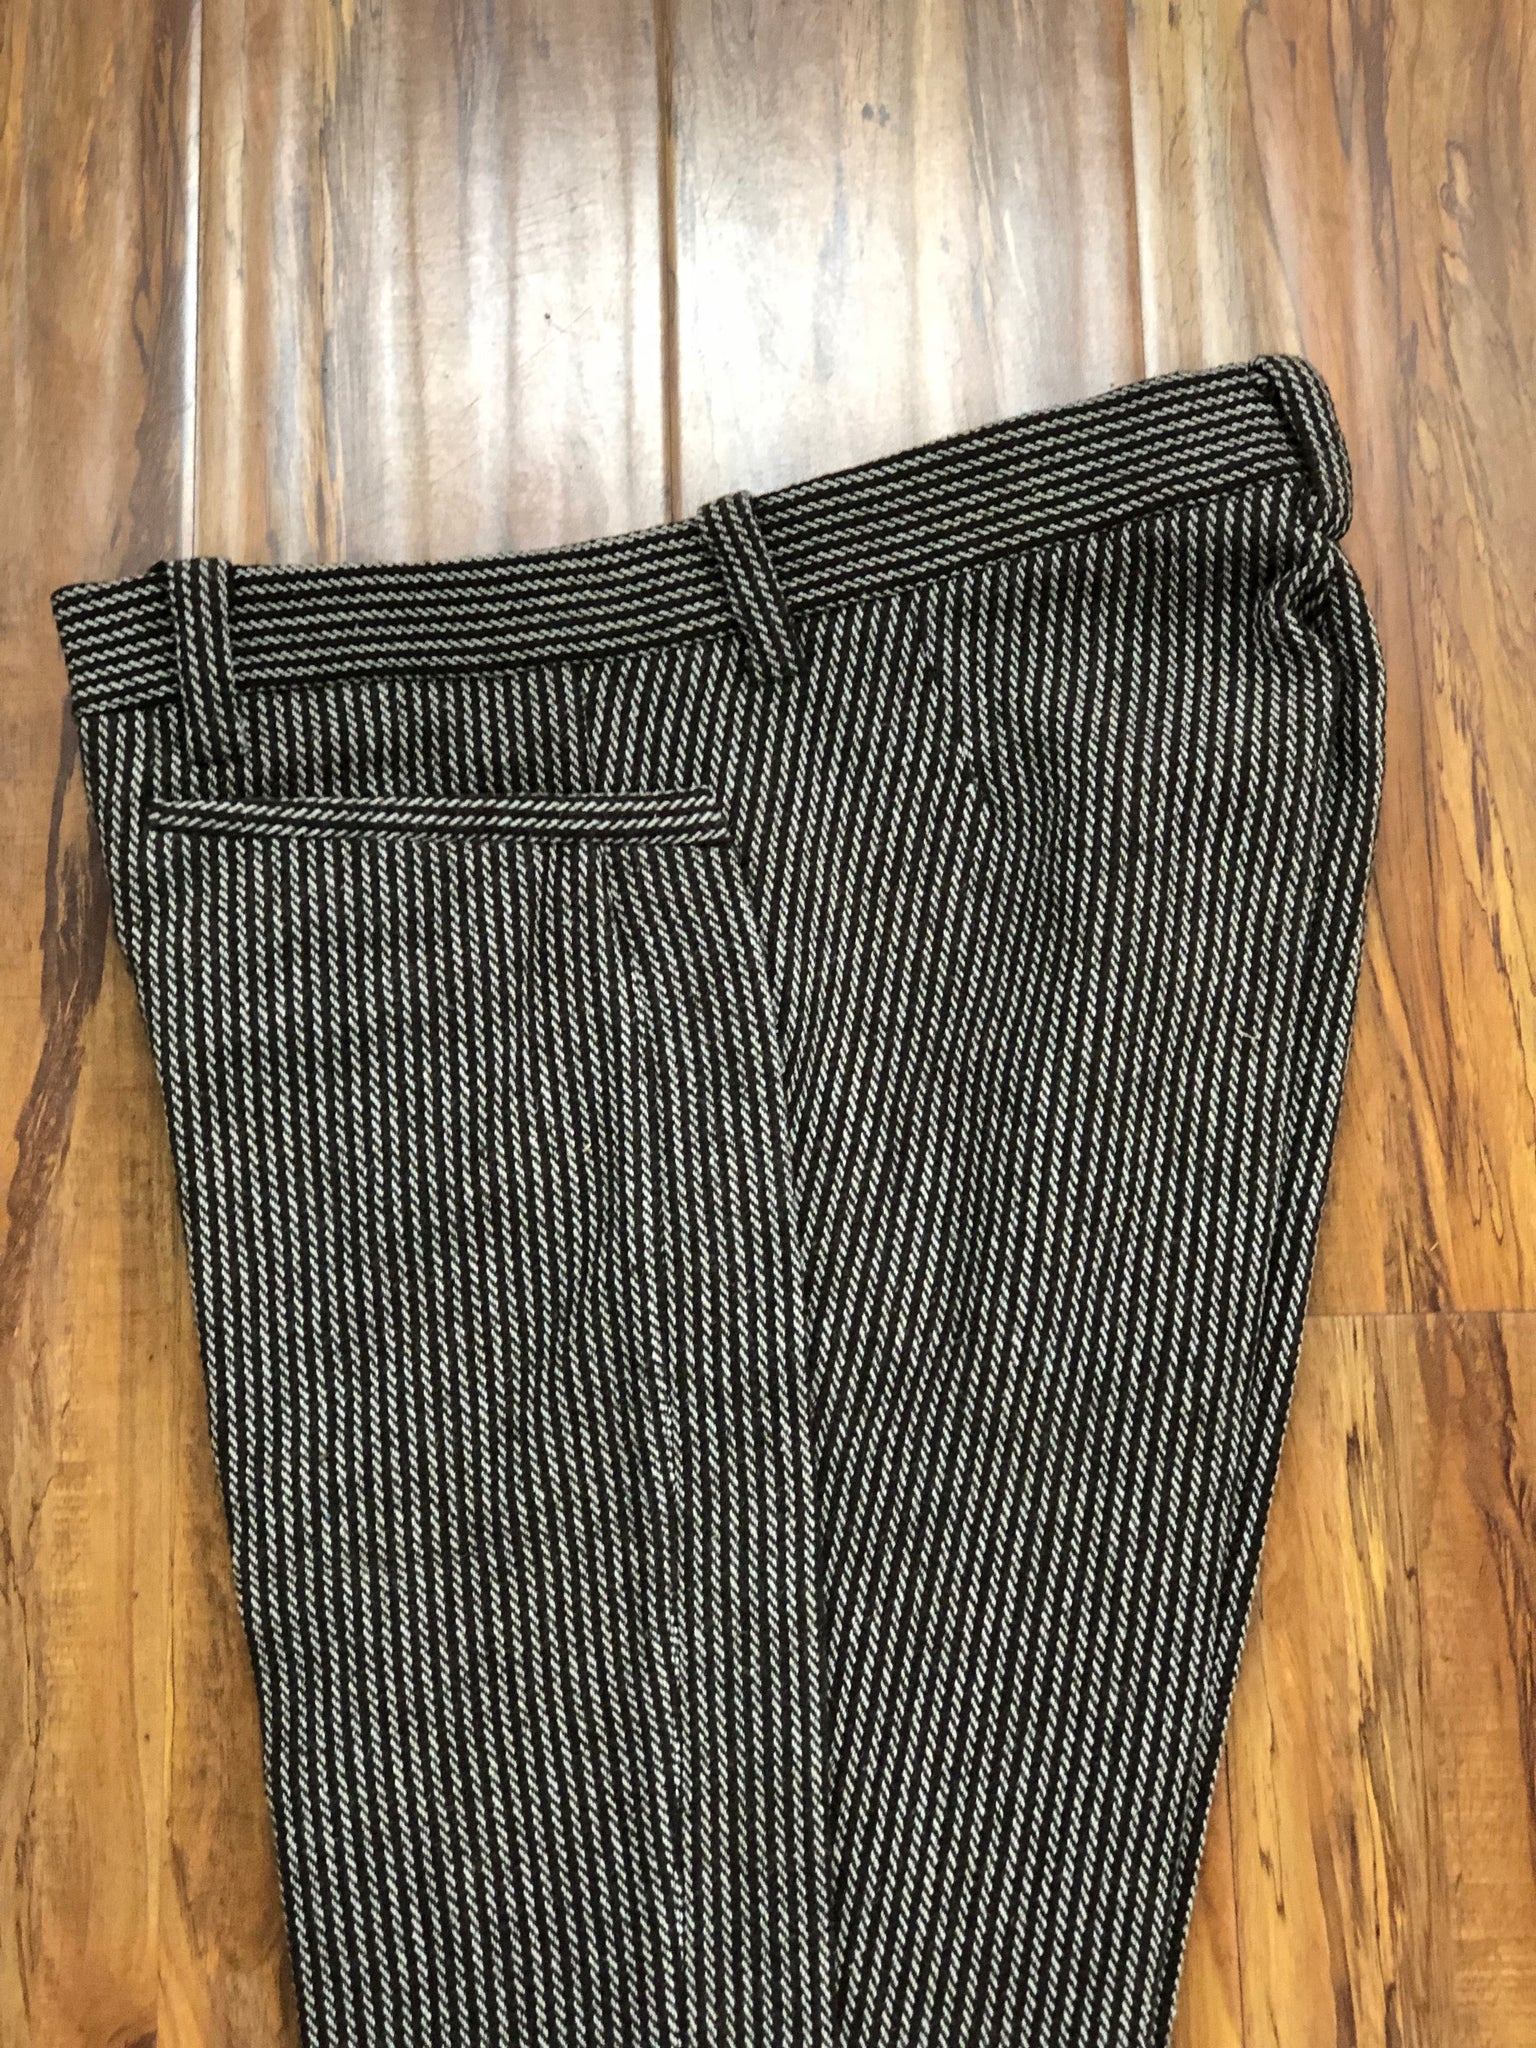 Buy Mens Woolen Trousers Online In India  Etsy India